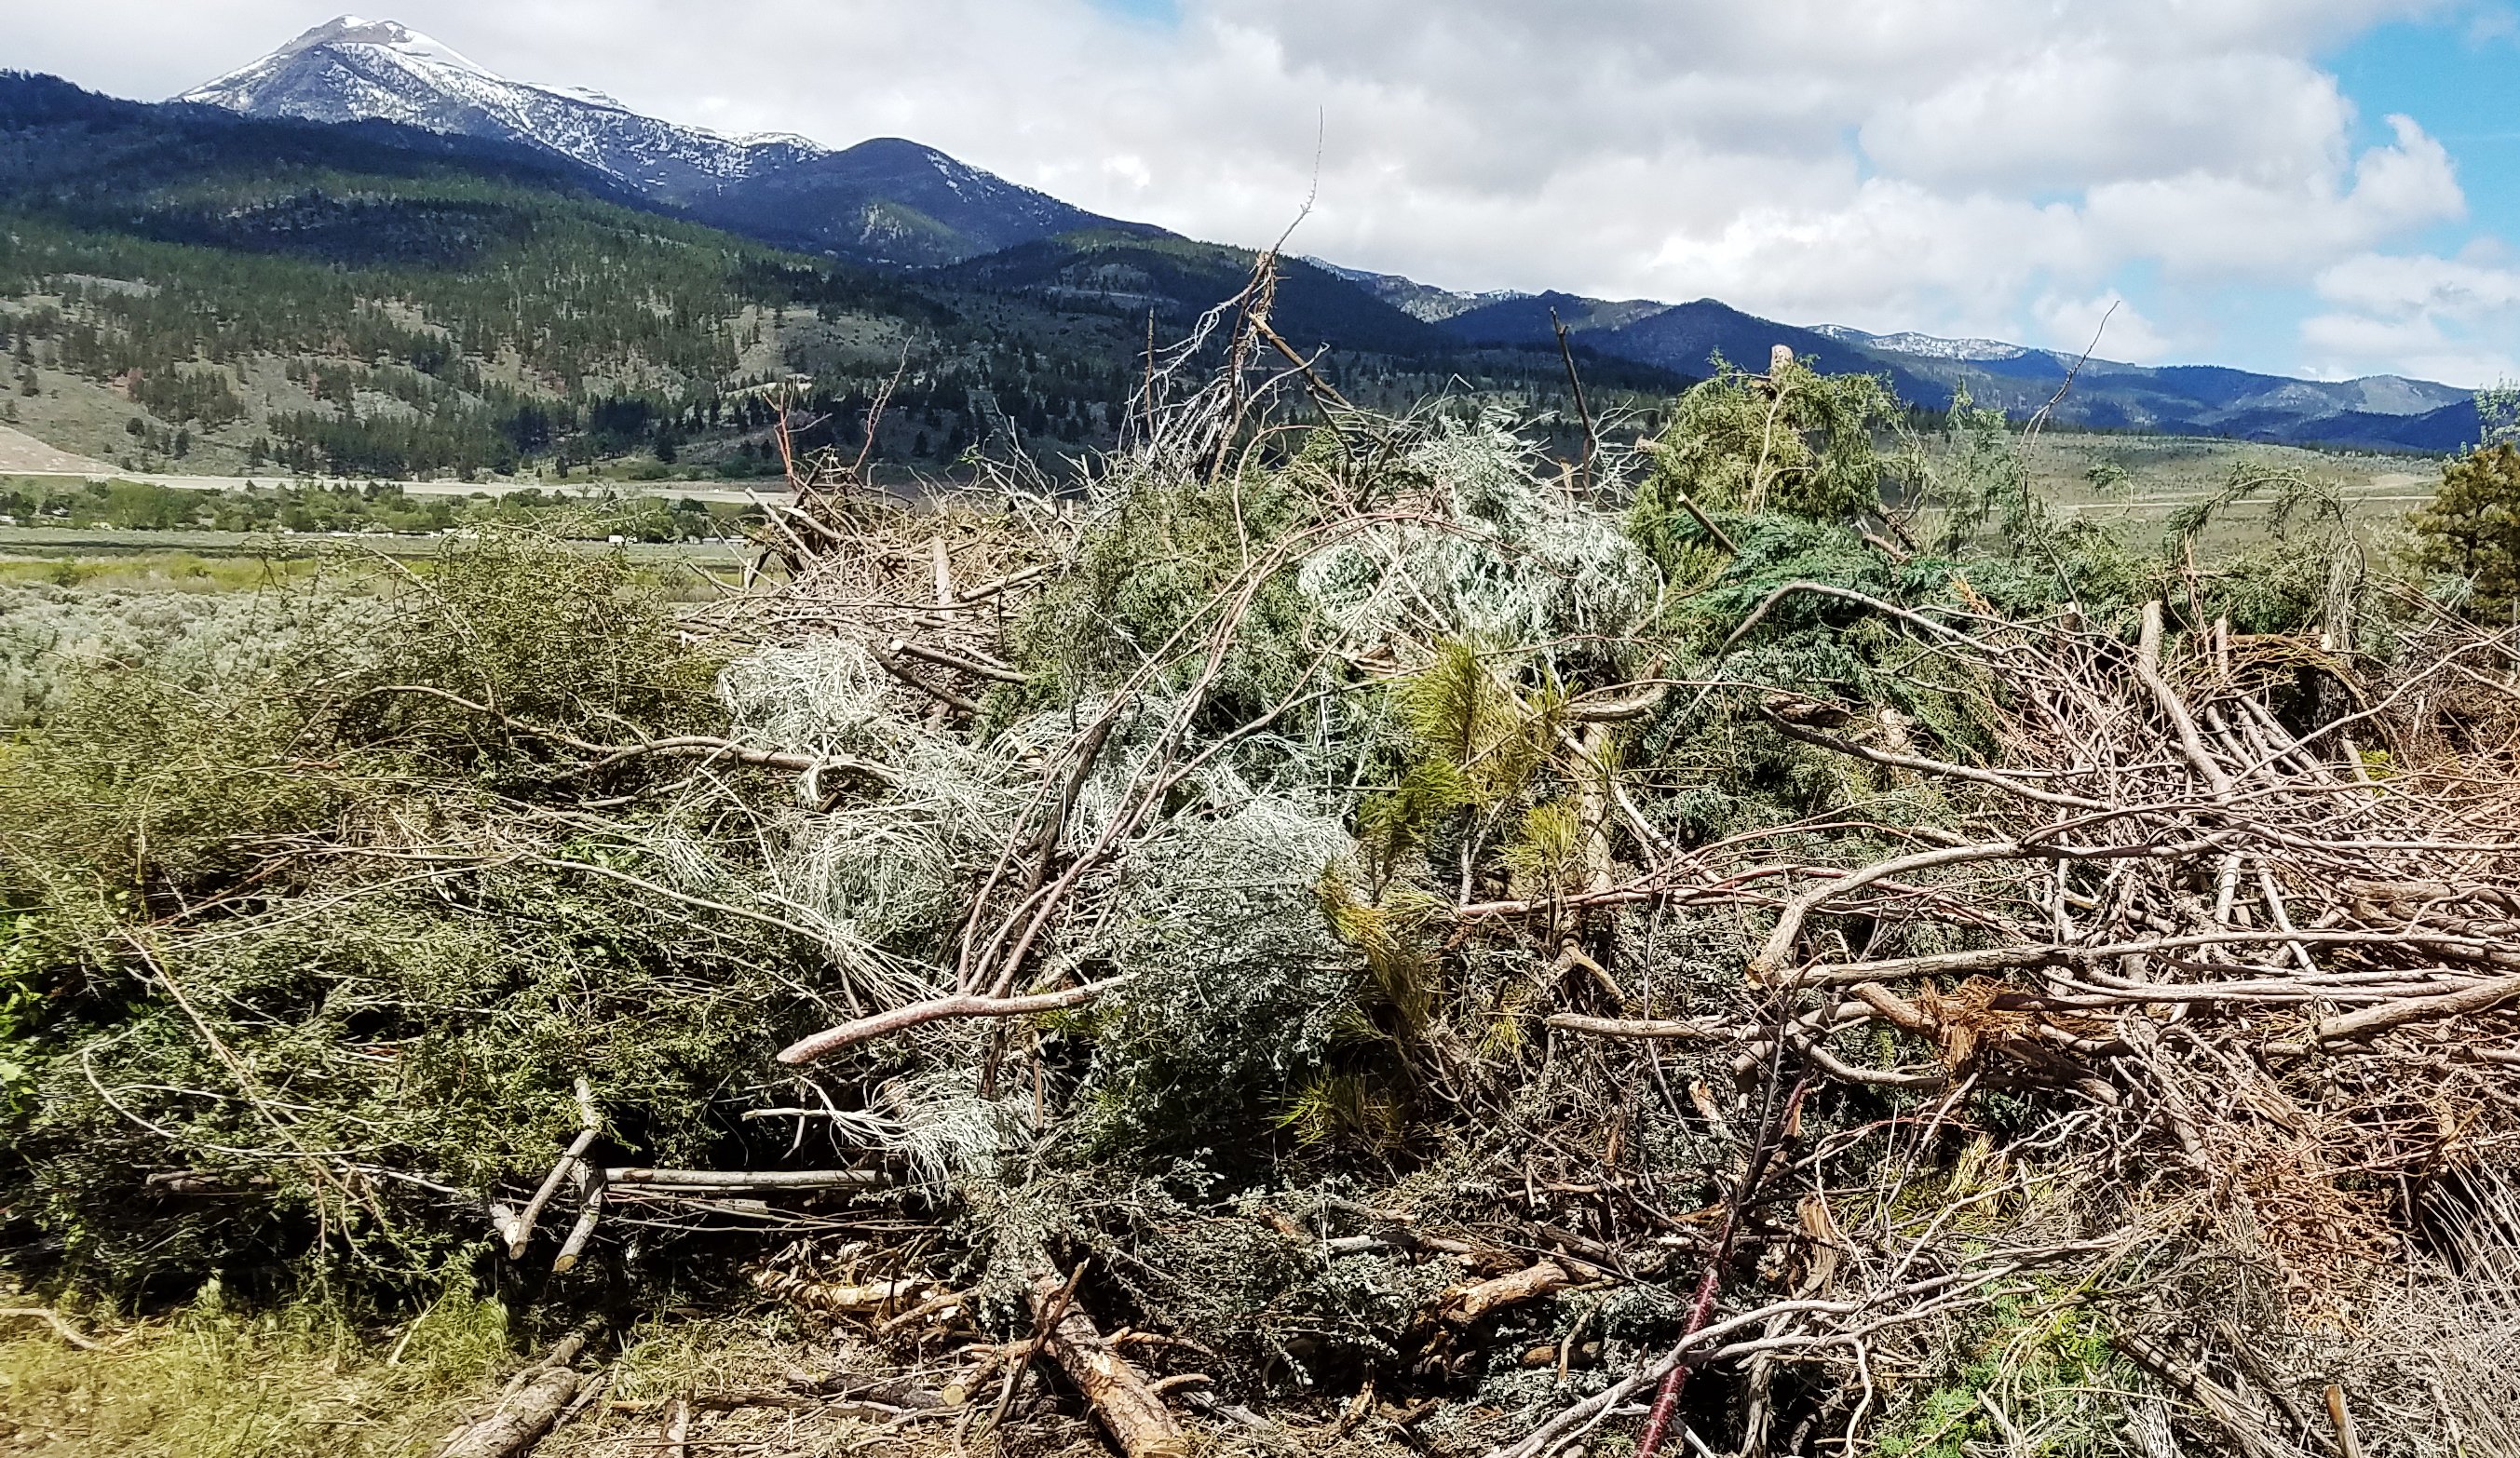 A picture of cut vegetation in a pile on the ground with mountains in the background.